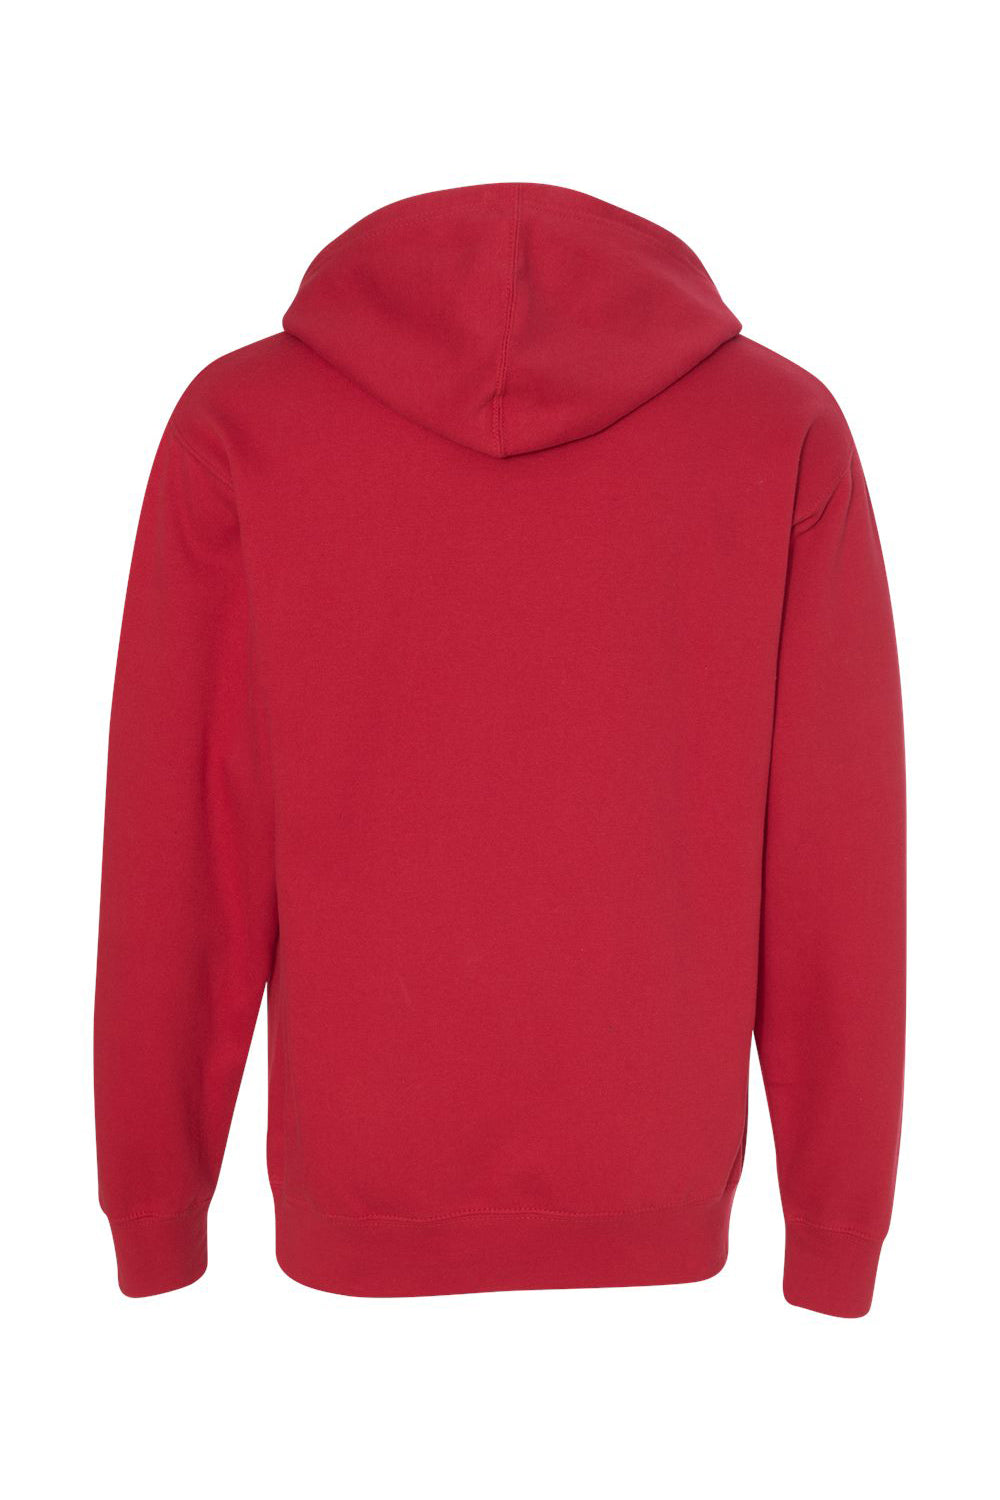 Independent Trading Co. SS4500 Mens Hooded Sweatshirt Hoodie Red Flat Back